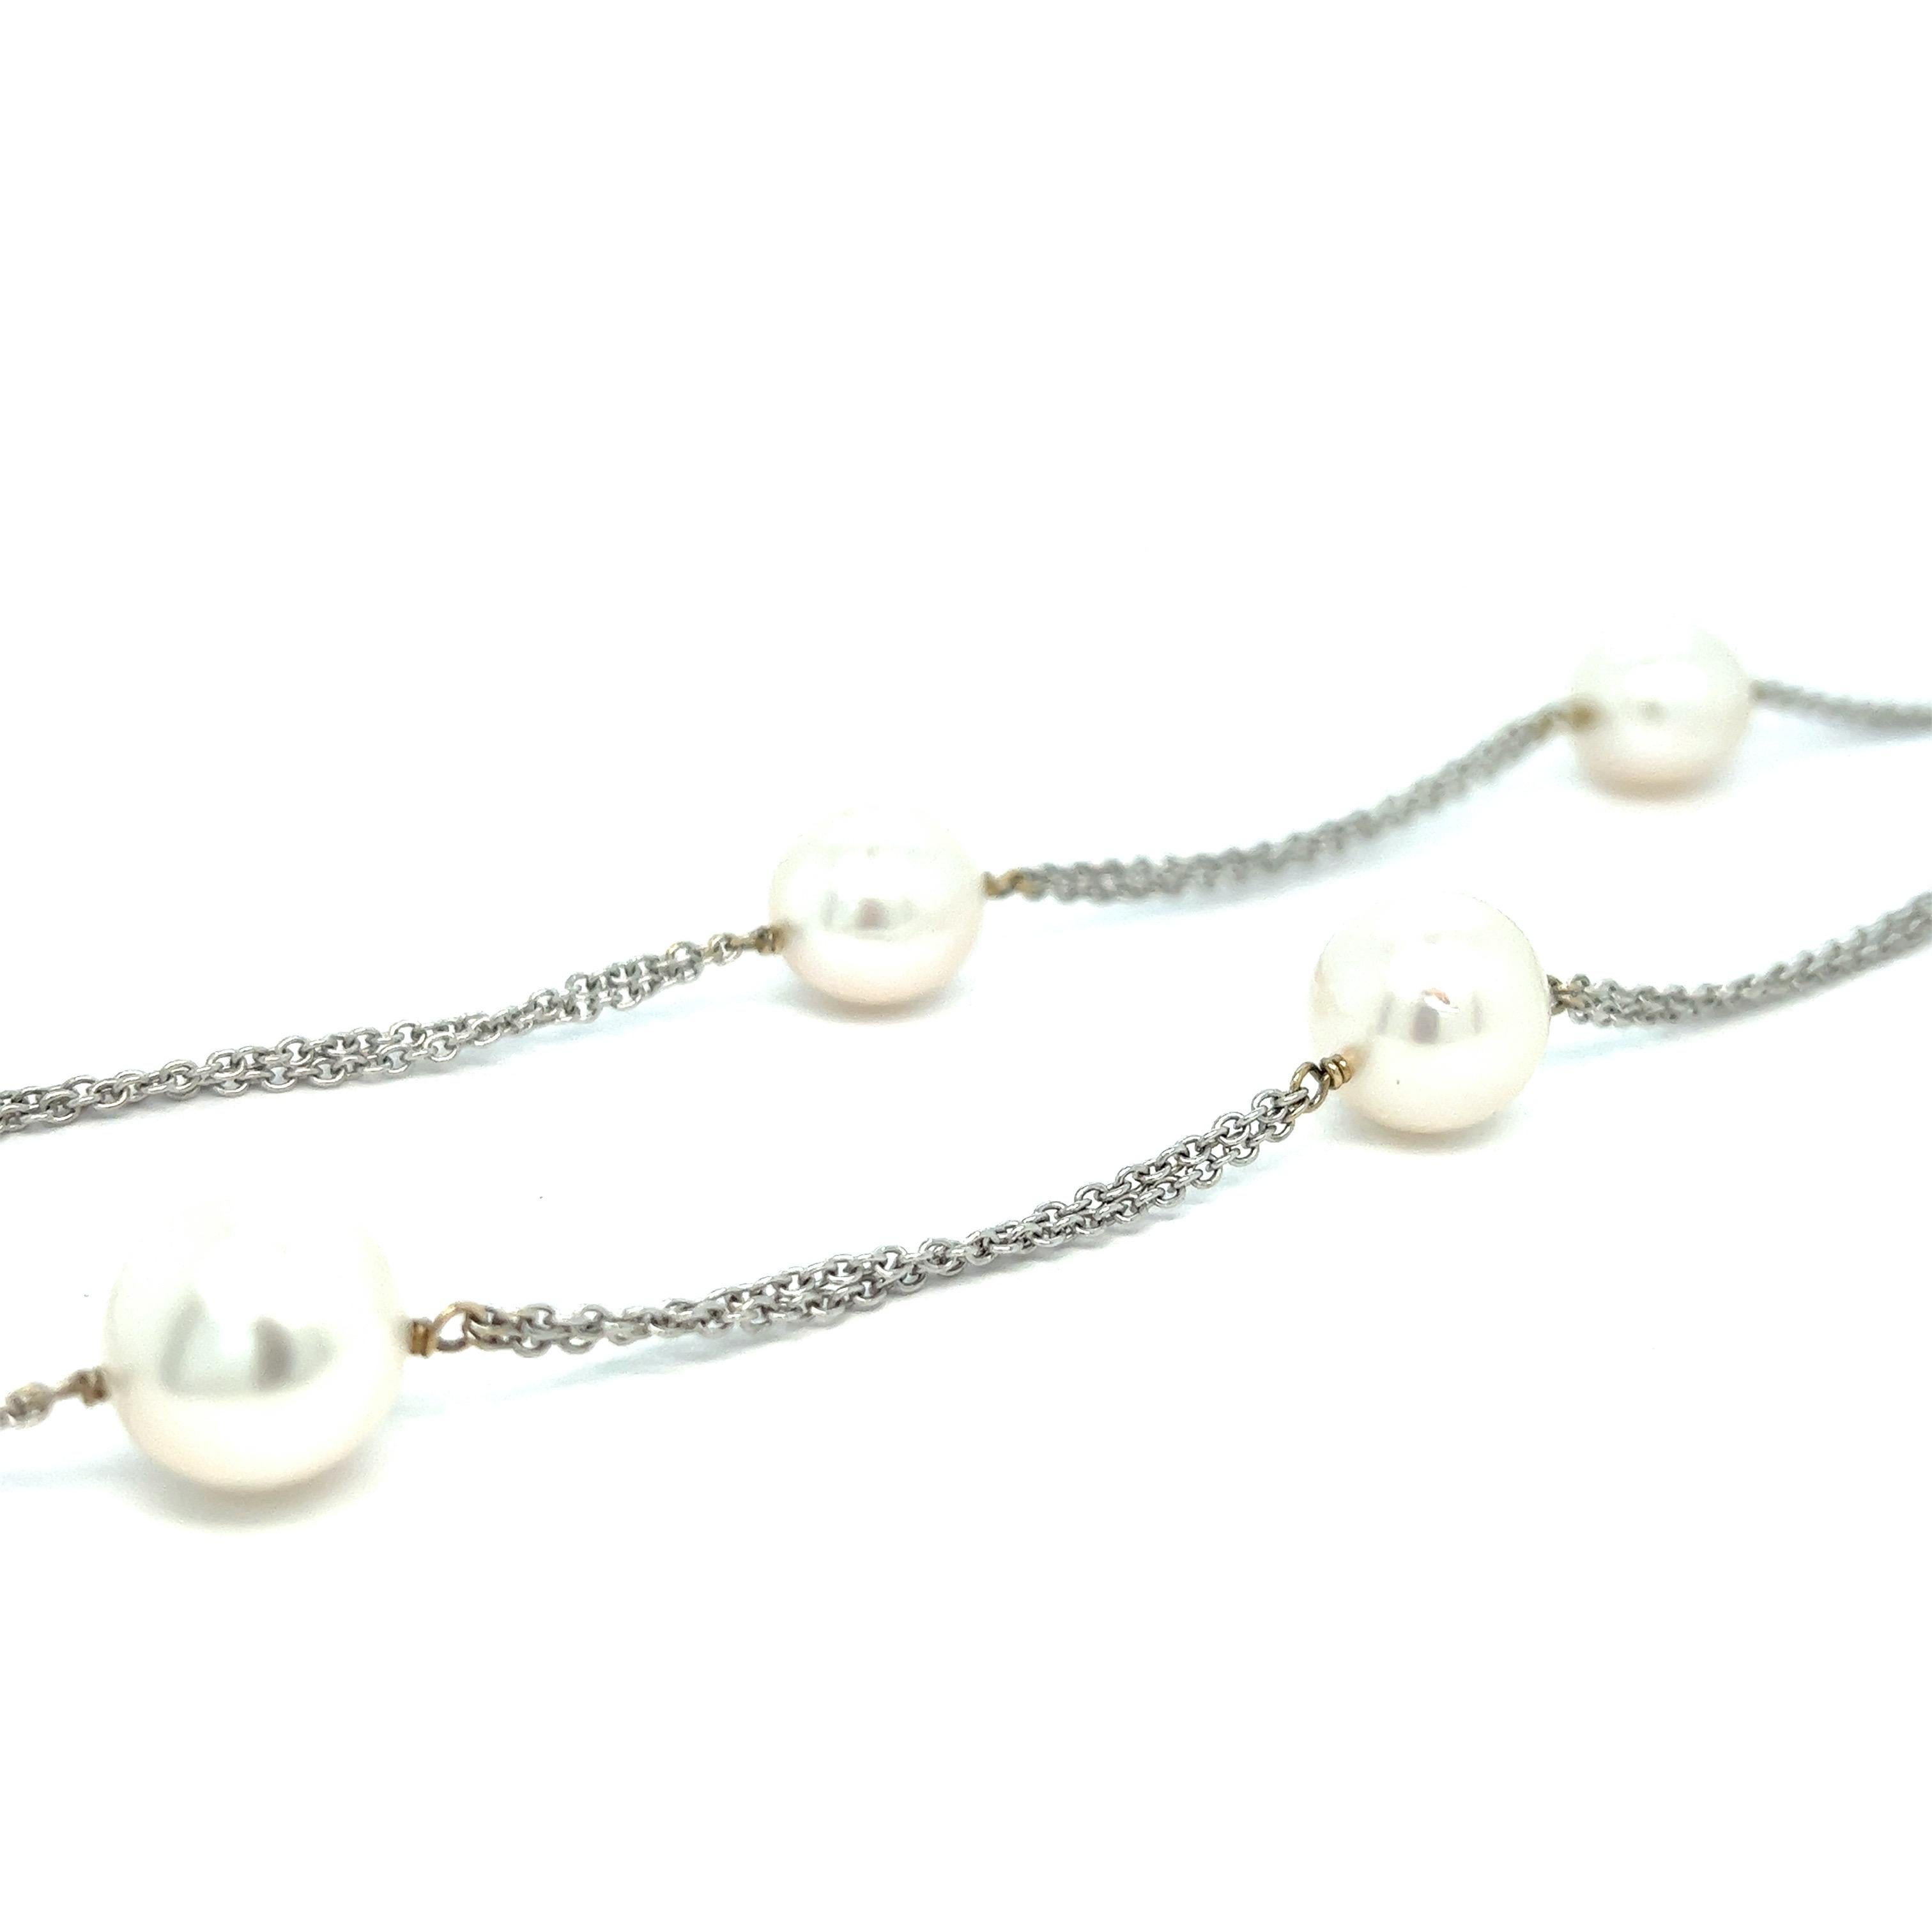 South sea pearl white gold necklace

Very fine seven south sea pearls (average thickness of 12 mm), 18 karat white gold; marked 750

Size: length 18.5 inches, can go up to 22 inches
Total weight: 25.6 grams